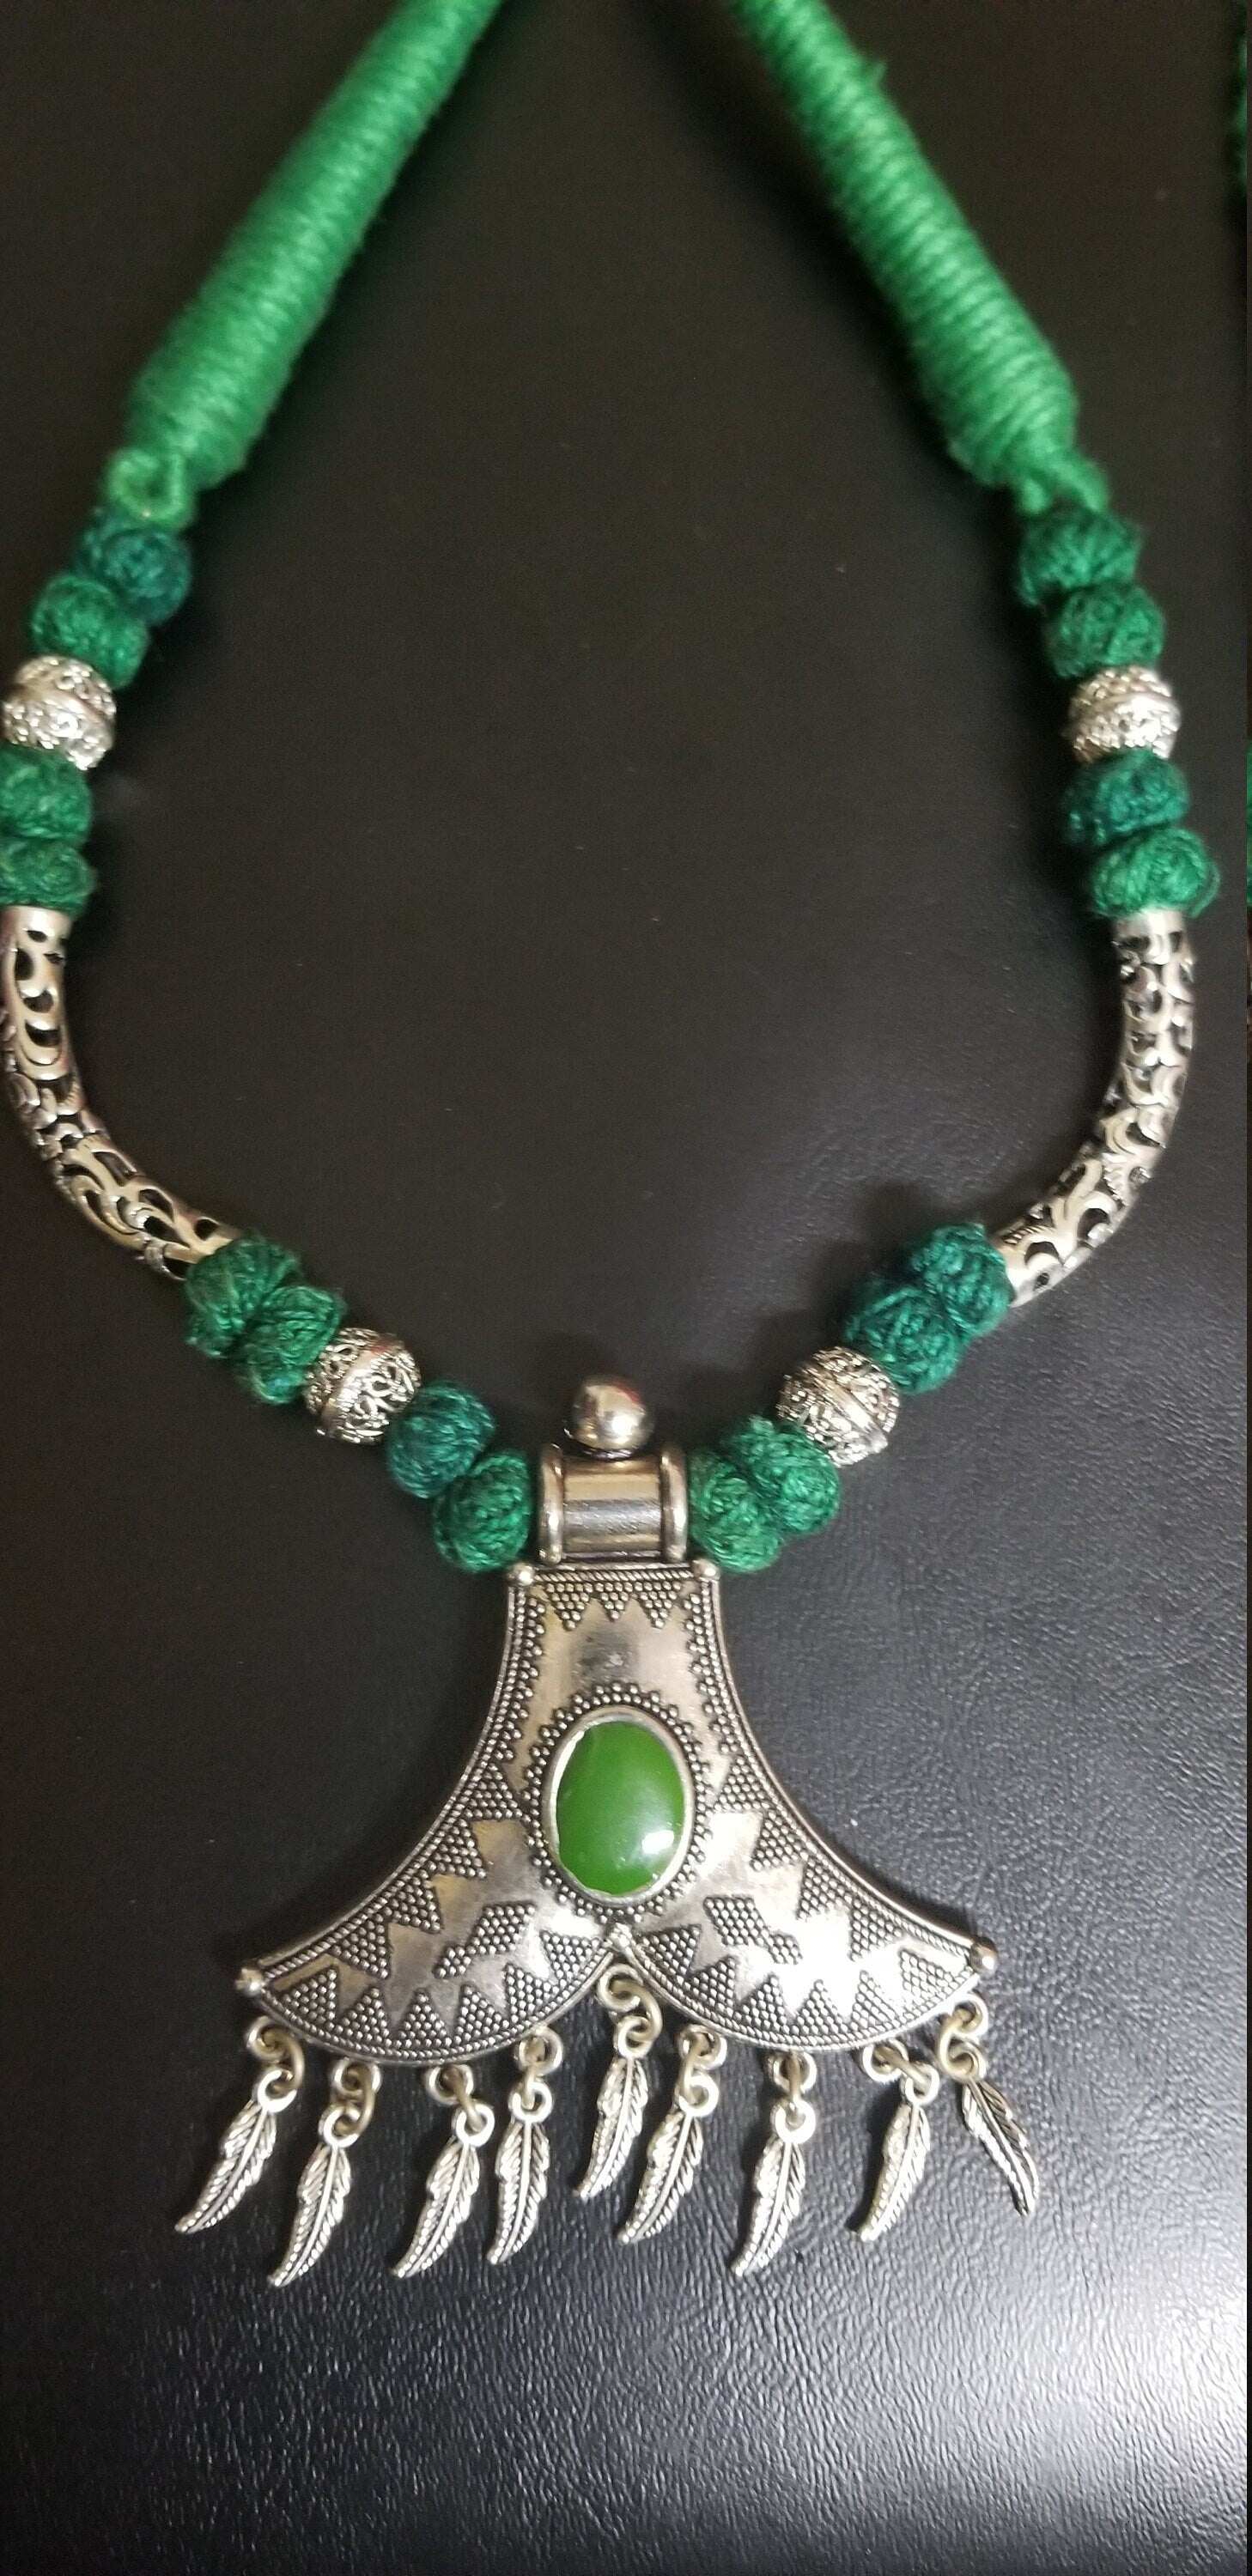 German silver pendant with green beads chain